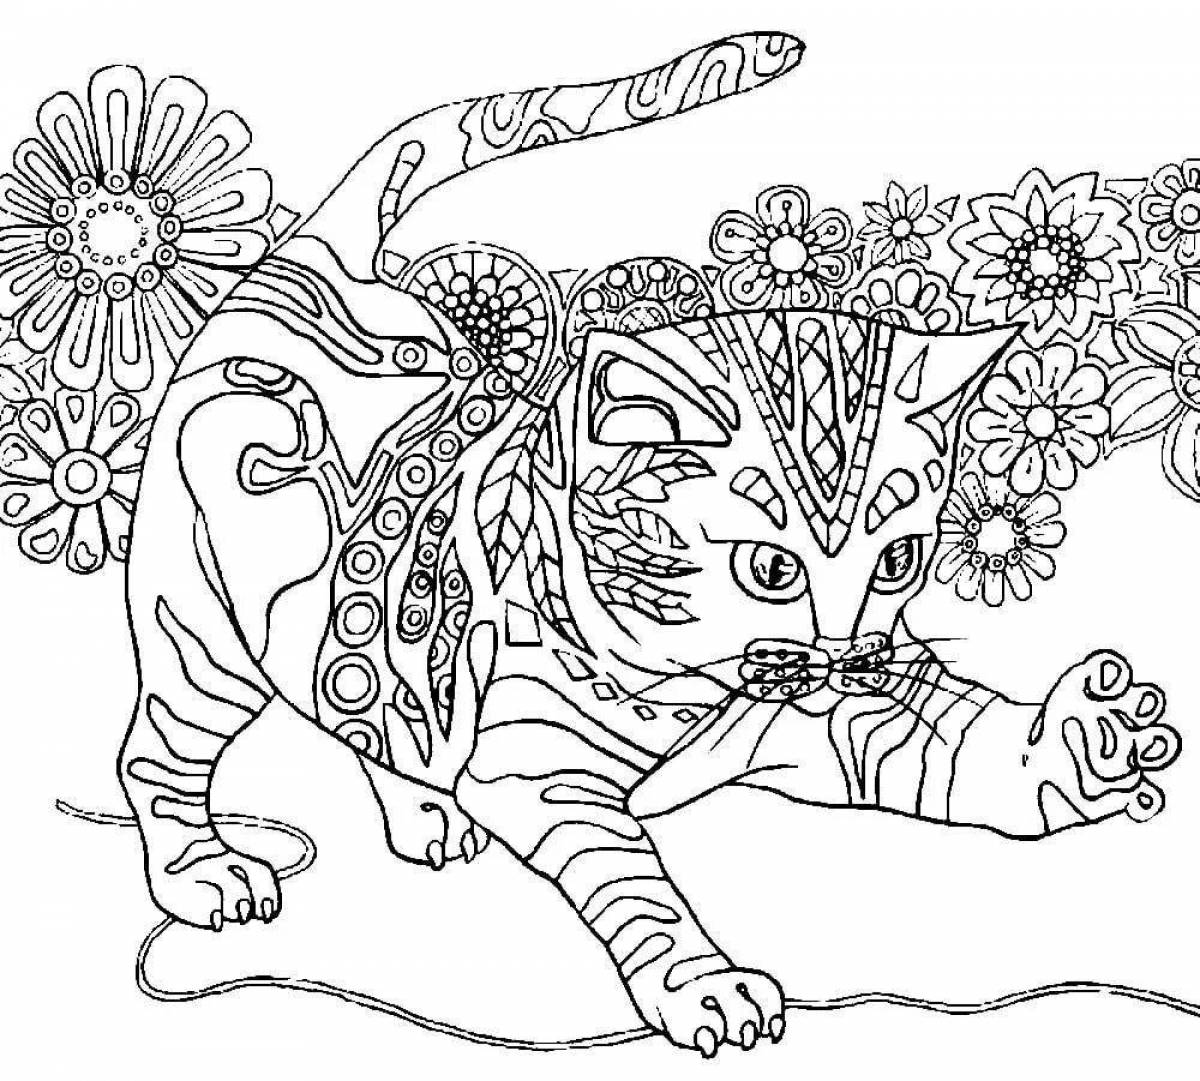 Intriguing coloring pages for girls